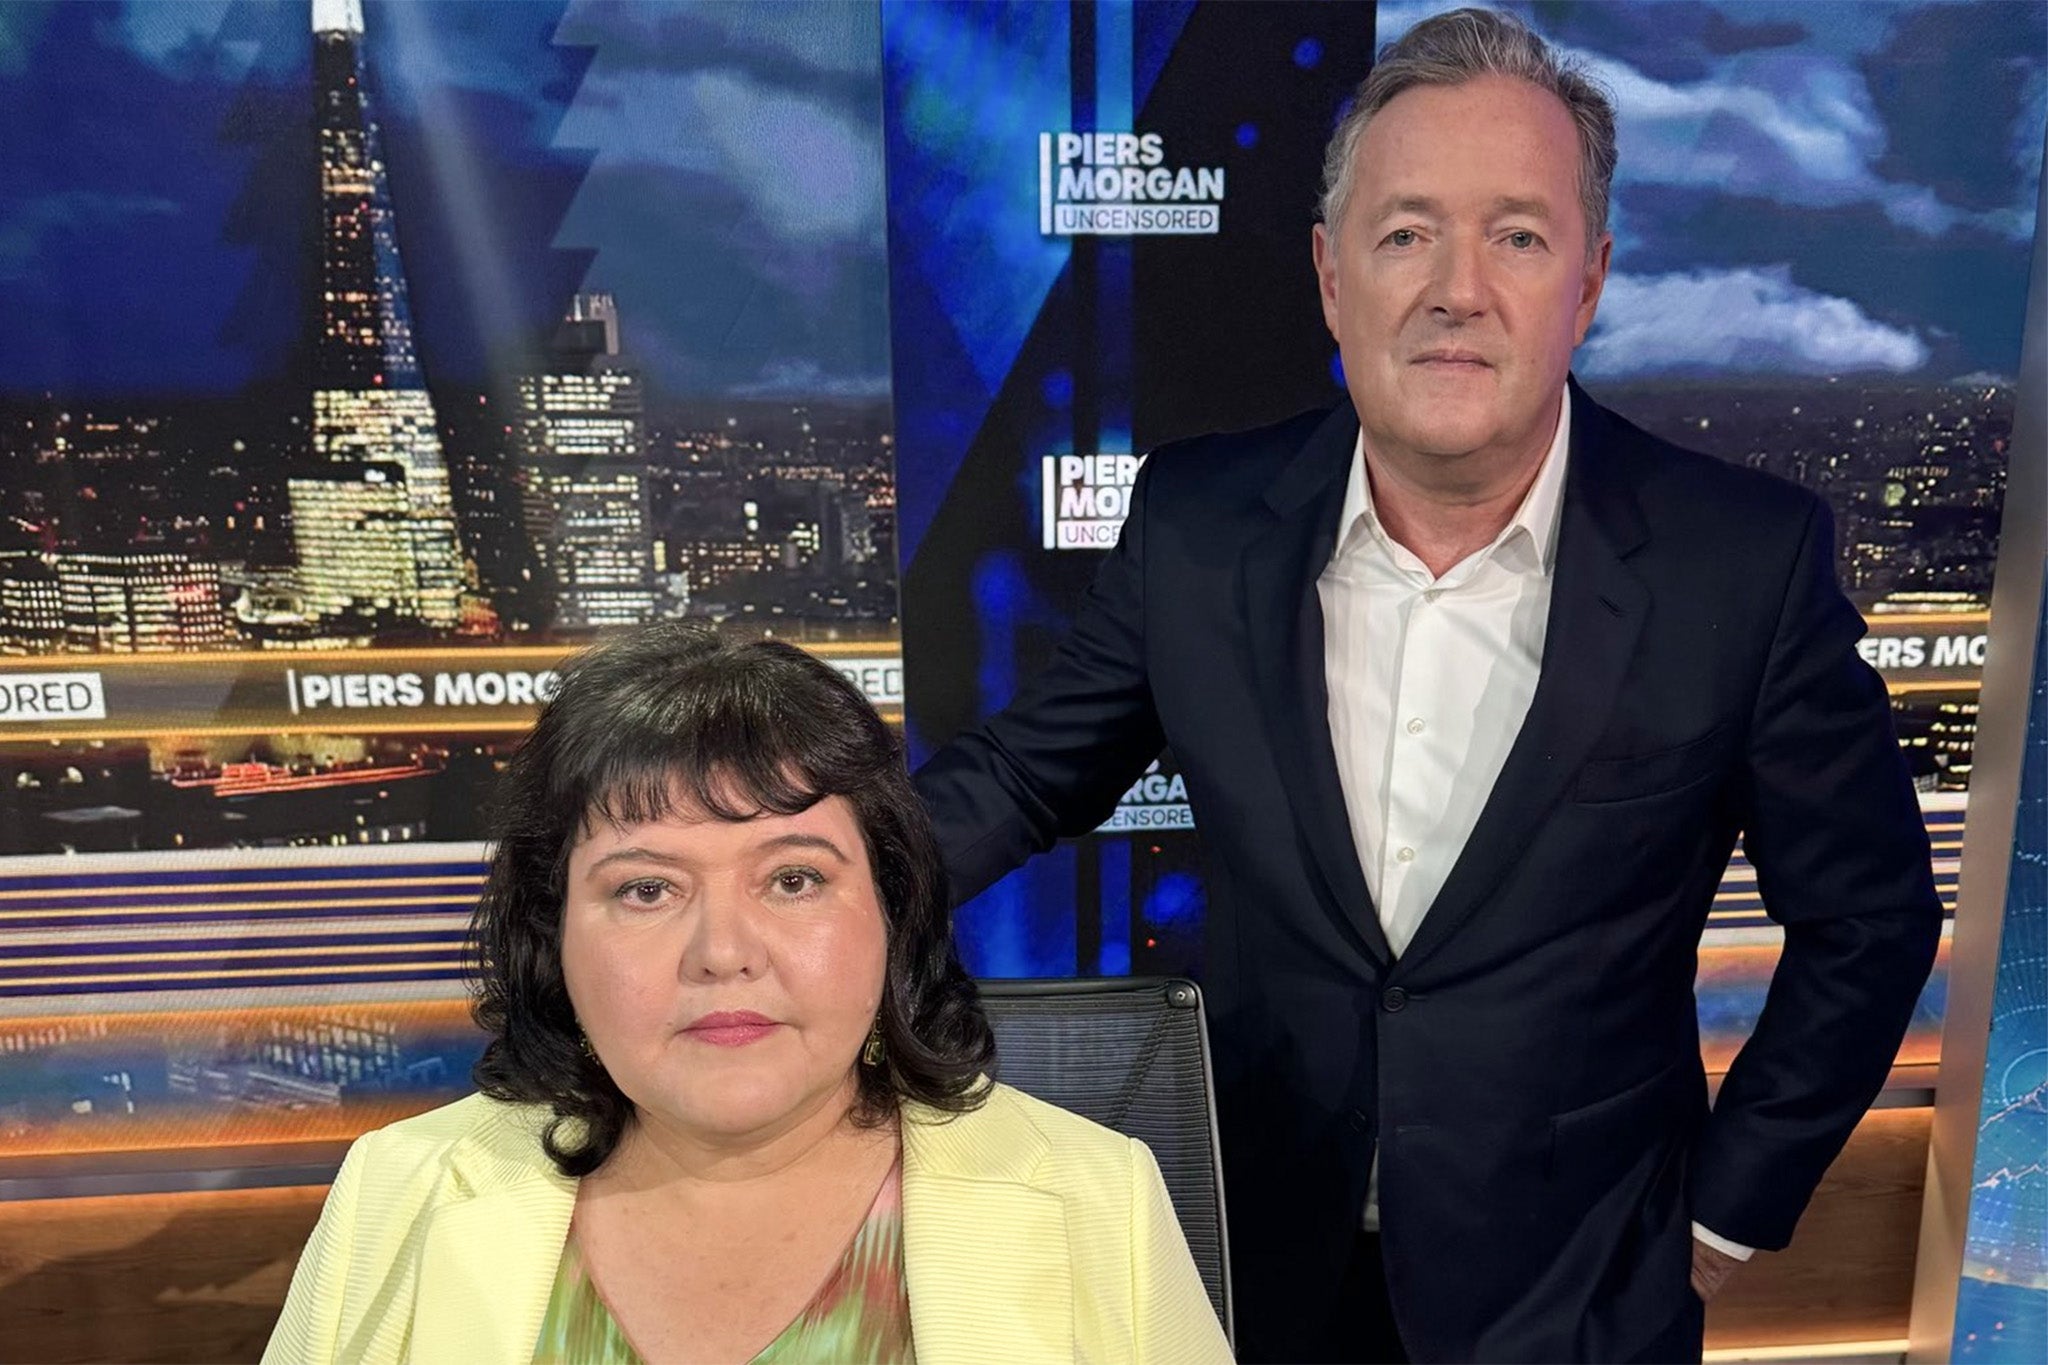 Piers Morgan promised to satiate fans’ desires by airing an interview with Fiona Harvey